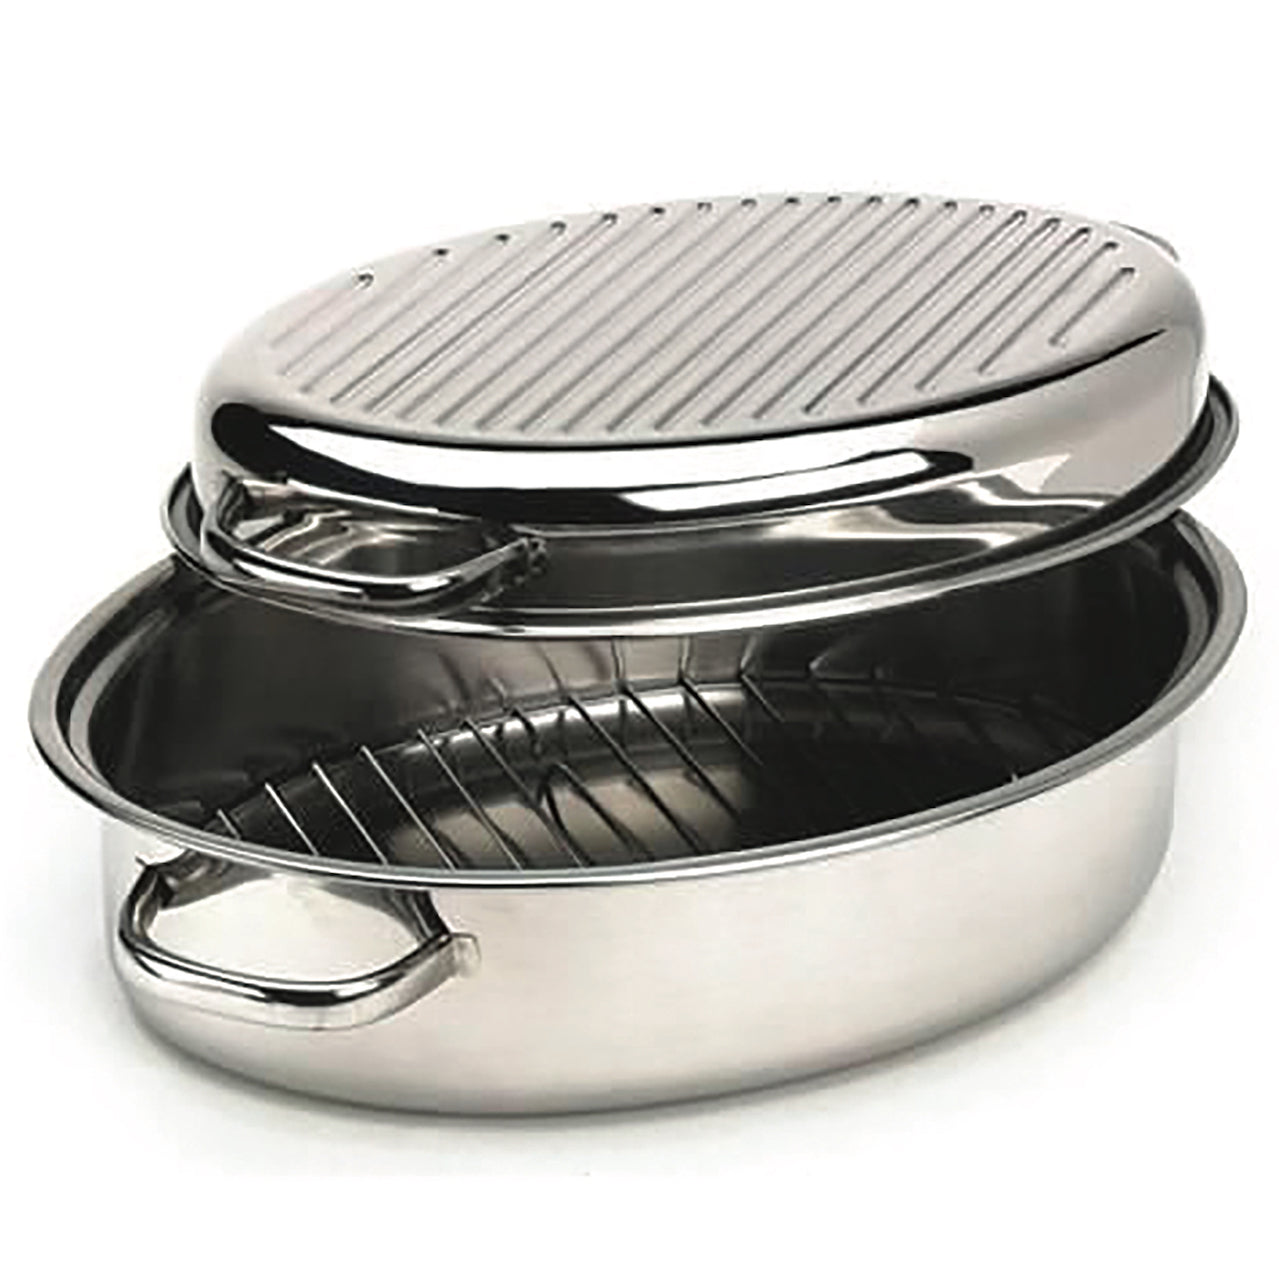 Viners Cookware Oval Roaster – Jean Patrique Professional Cookware